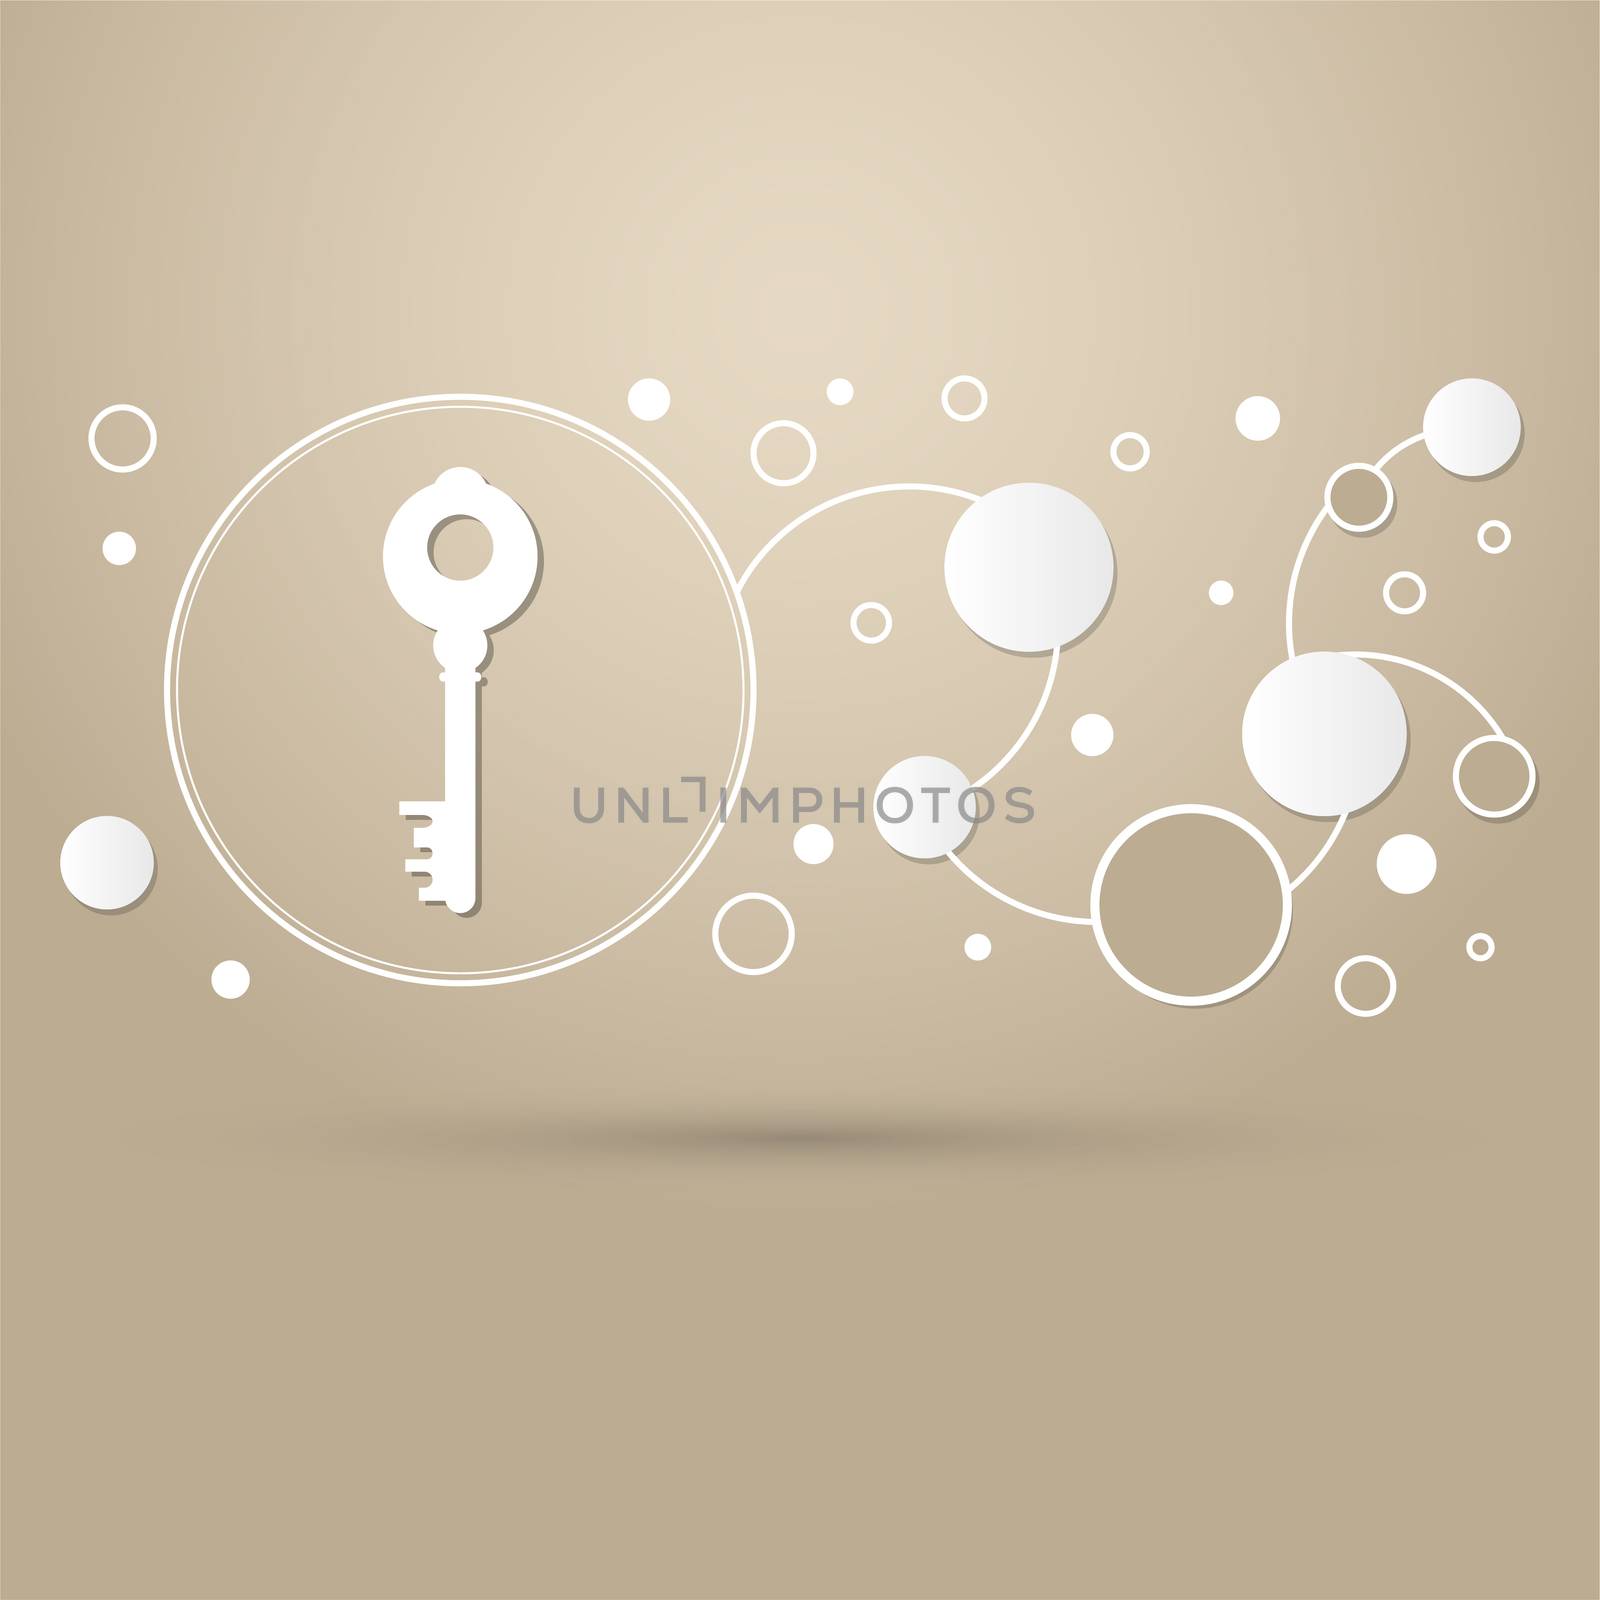 Key Icon on a brown background with elegant style and modern design infographic.  by Adamchuk